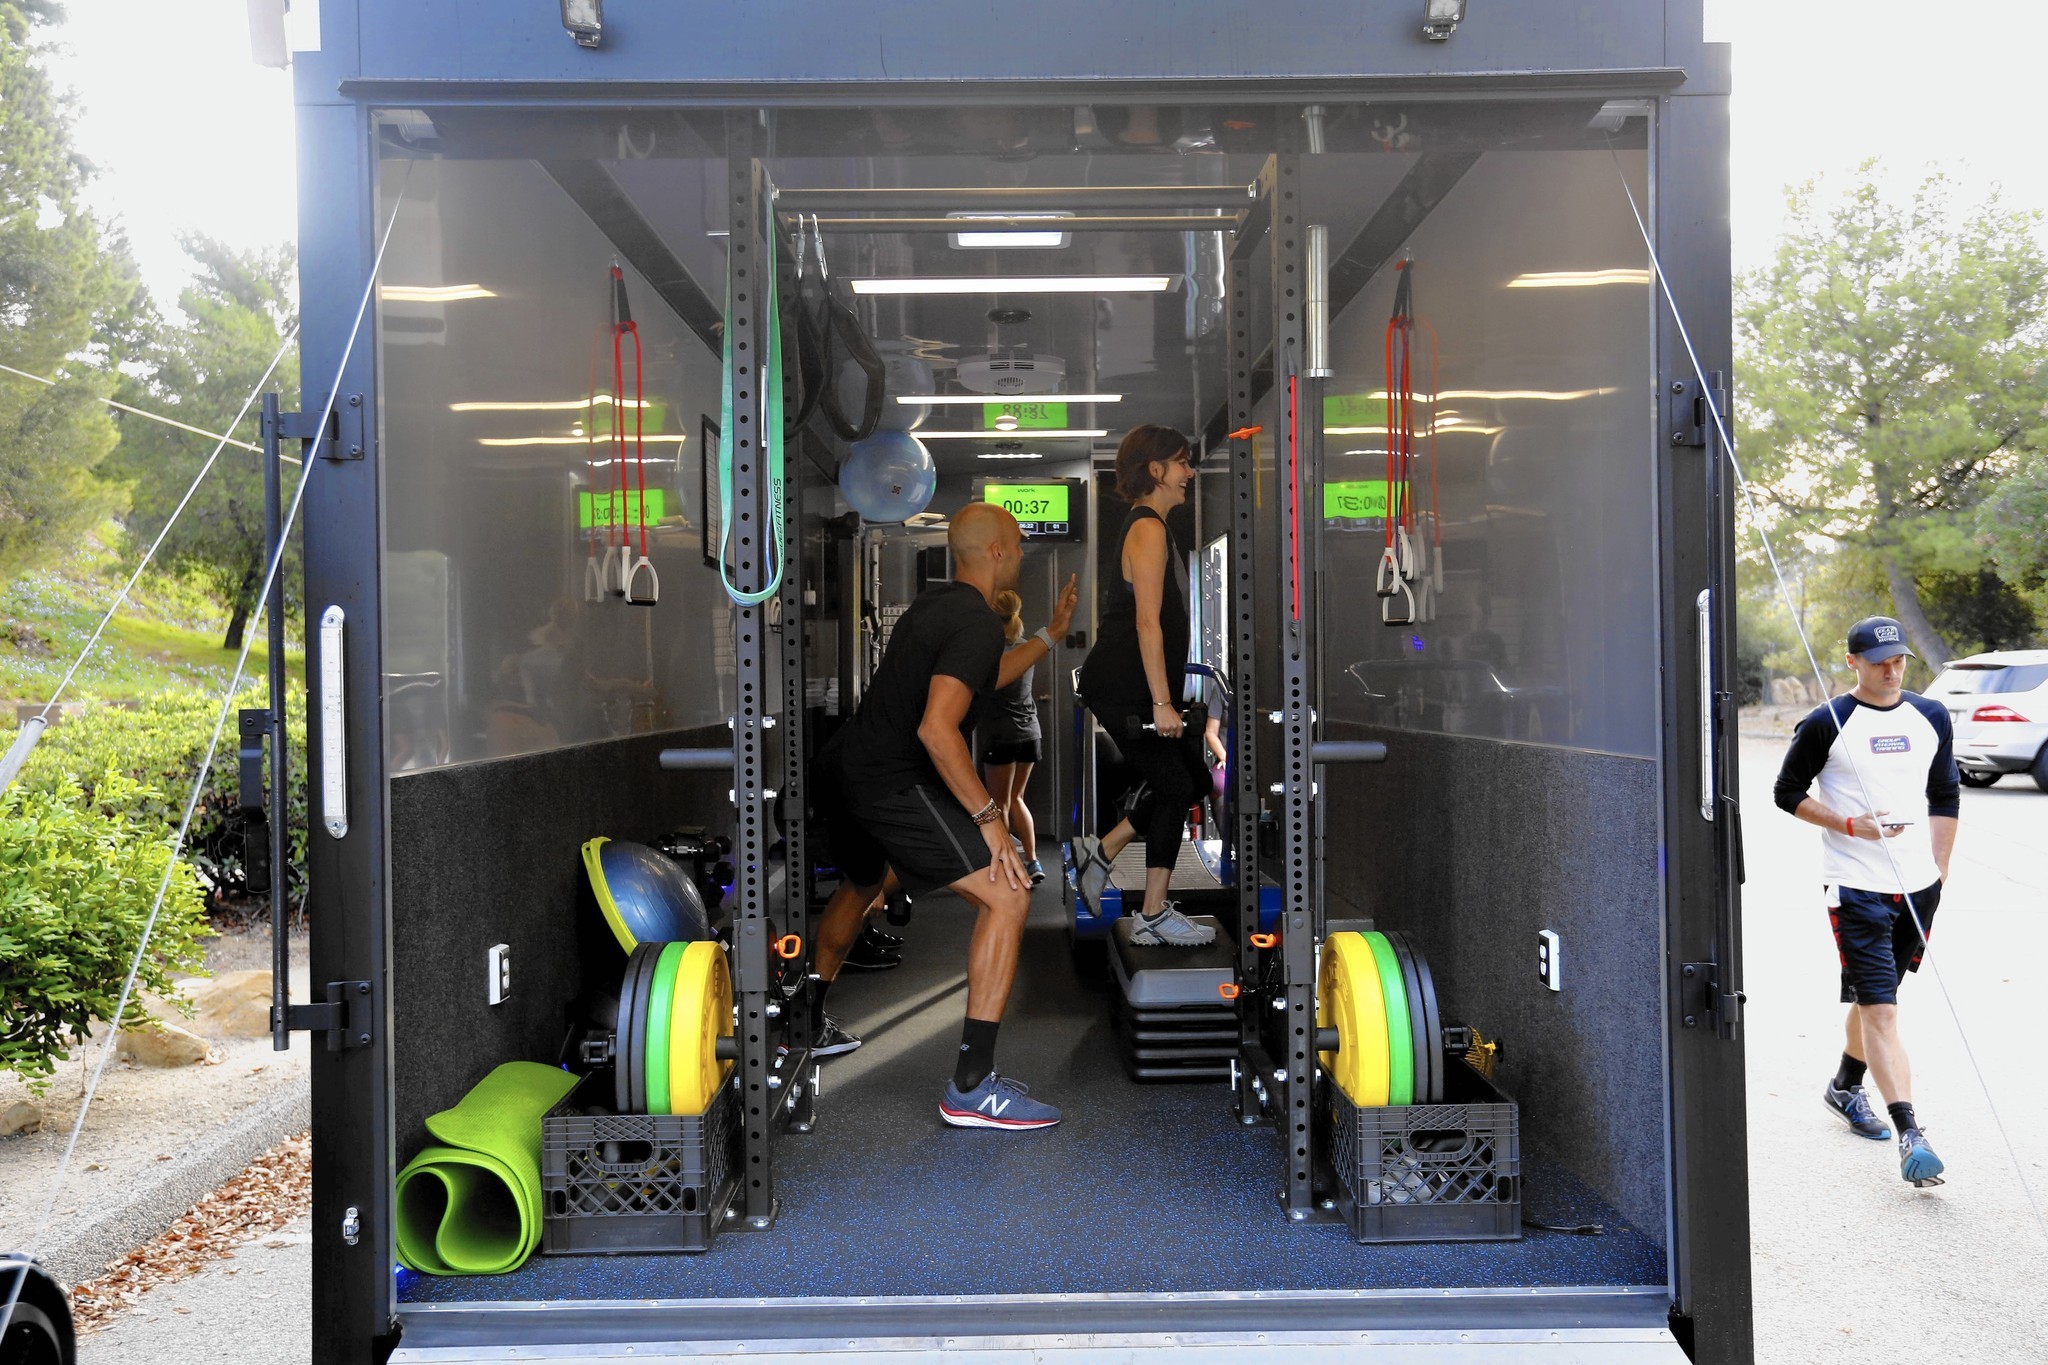 15 Minute Mobile Workout Truck for Build Muscle